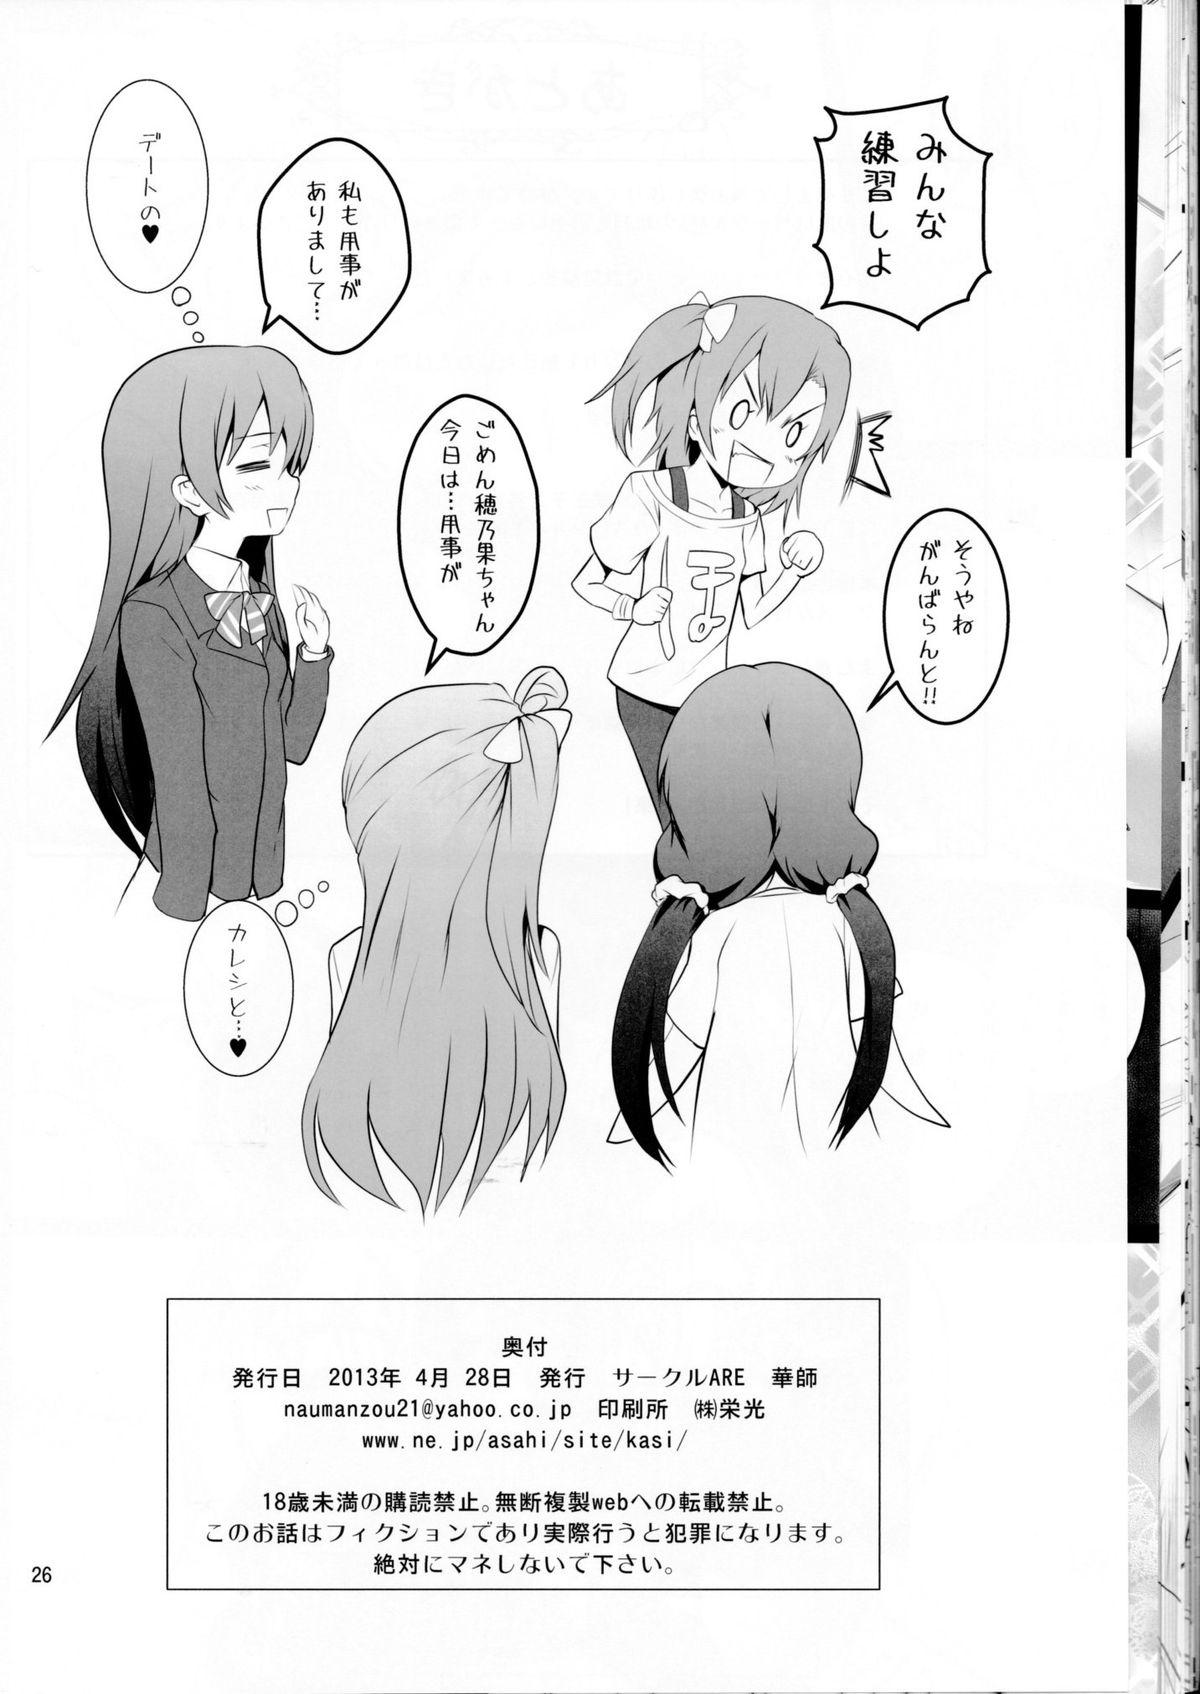 Picked Up BiBittored Operation - Love live 18yearsold - Page 25